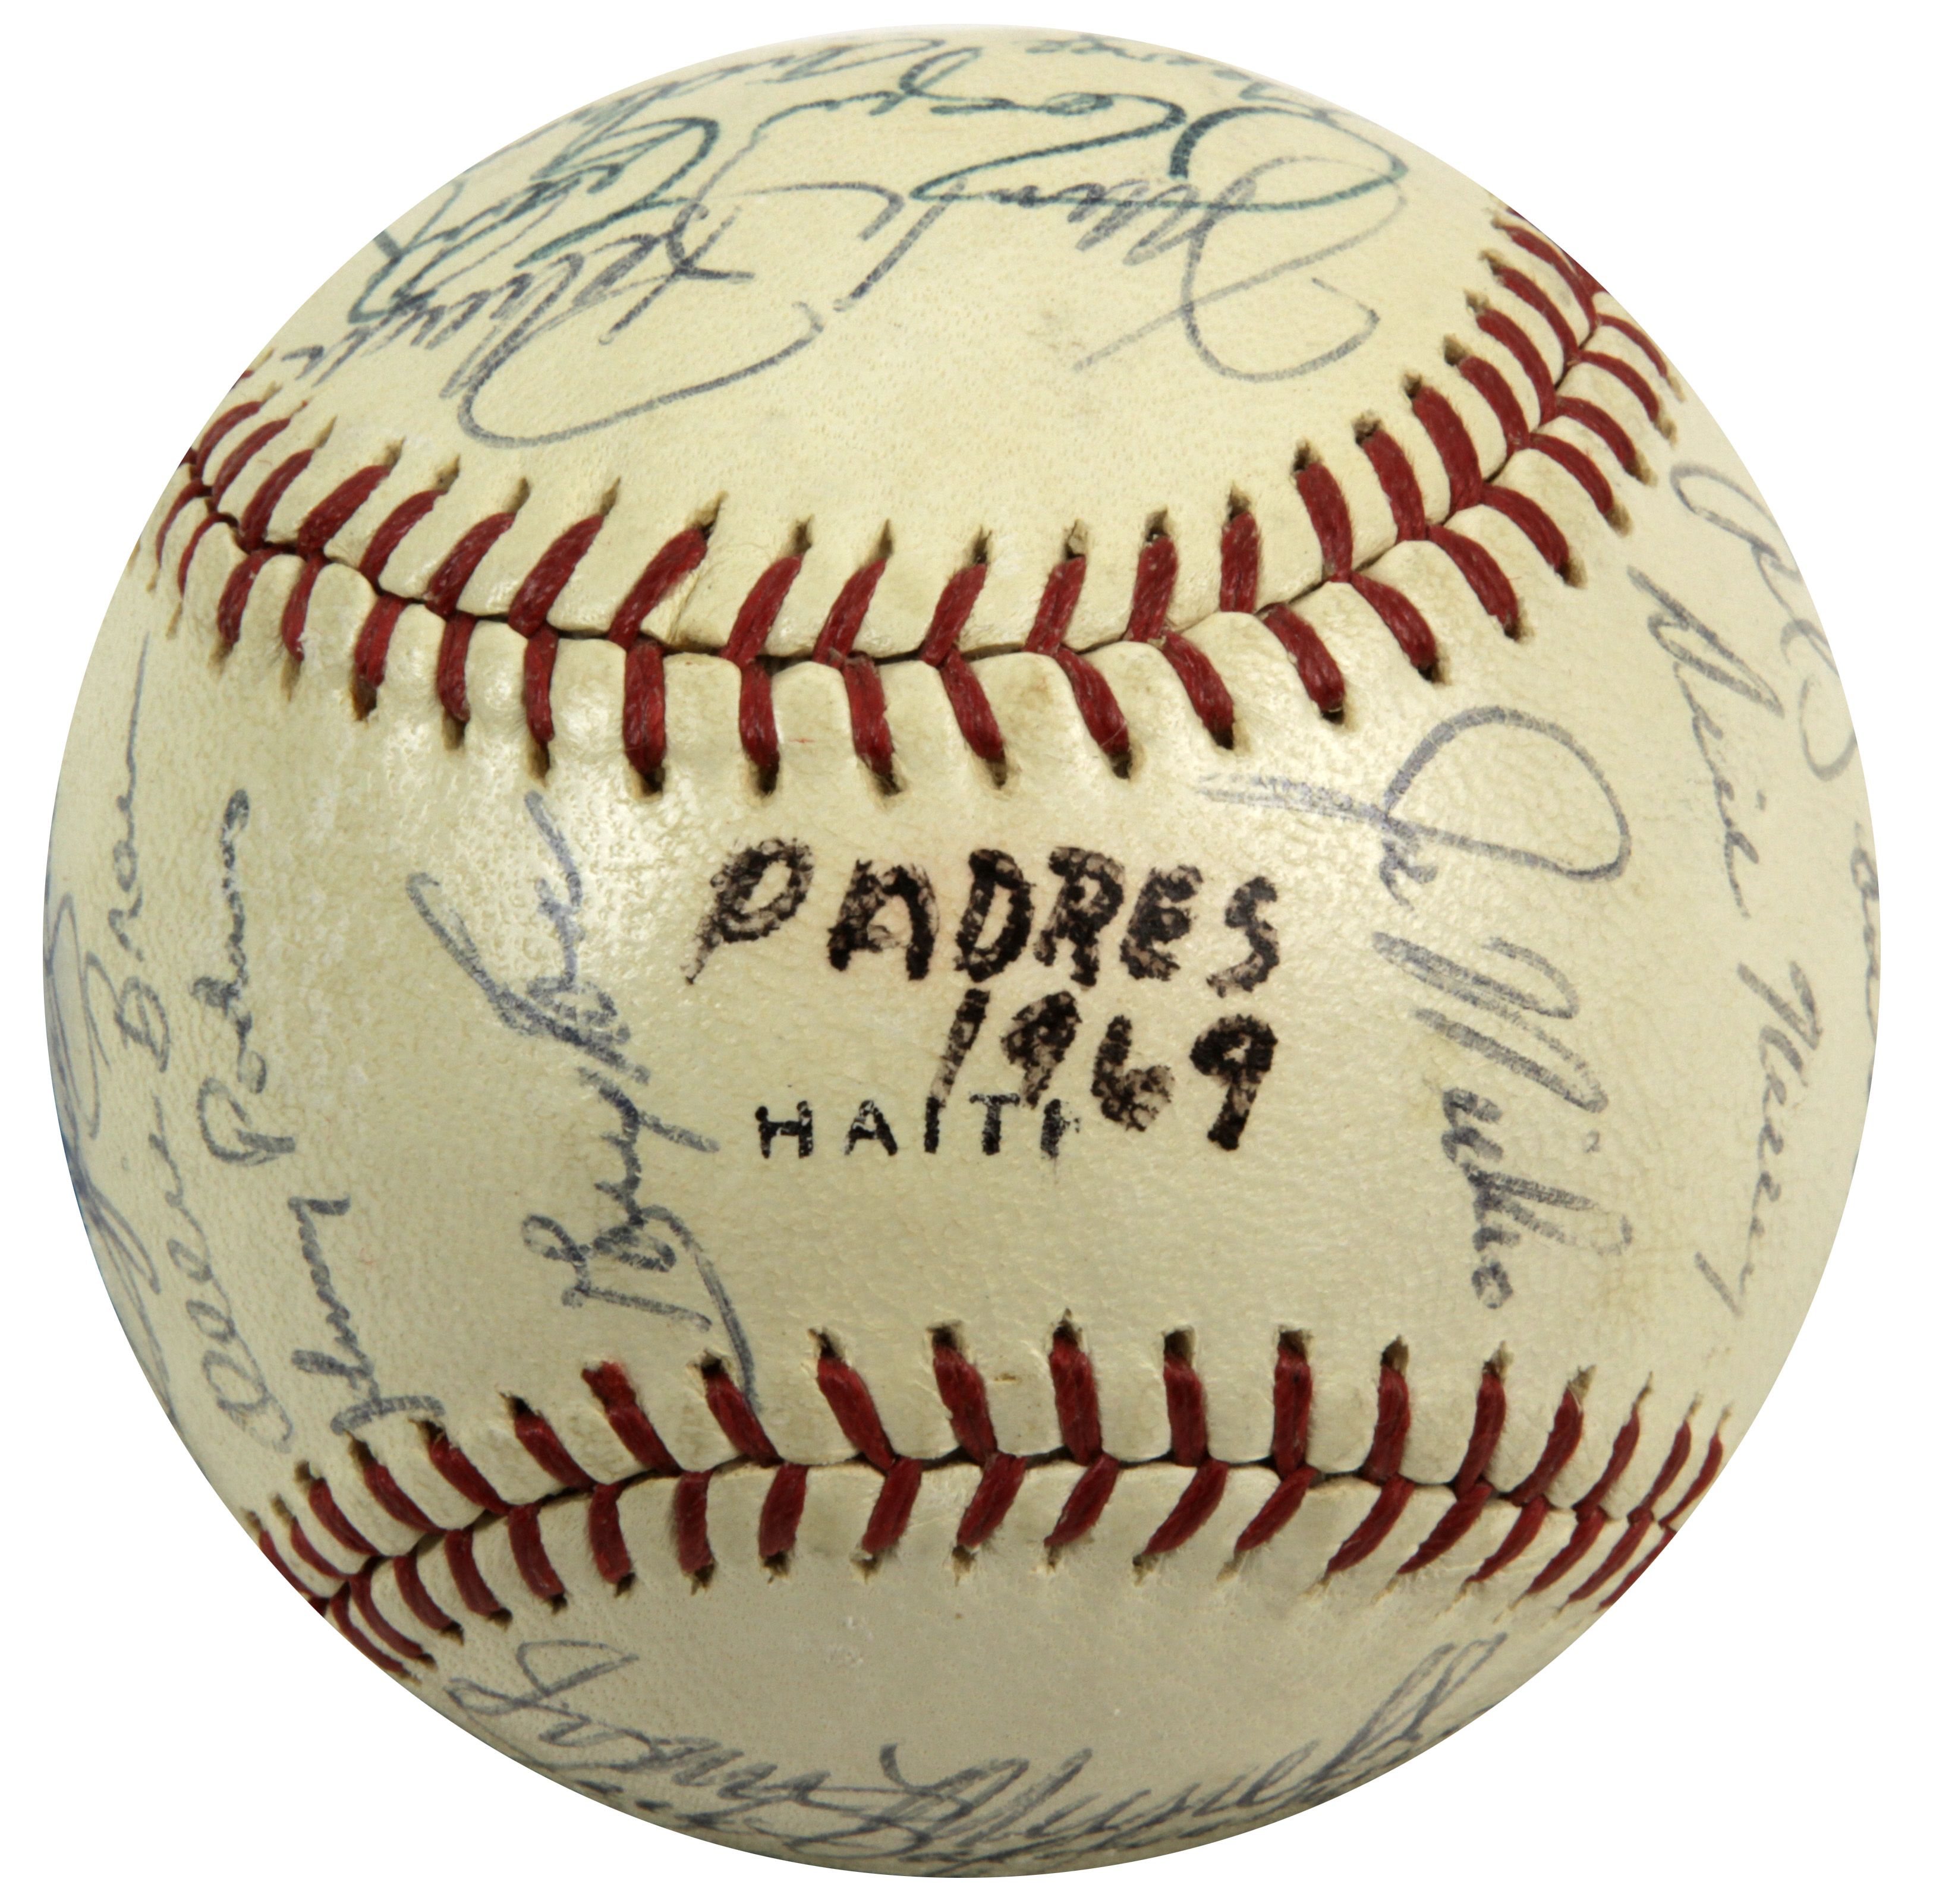 1969 SAN DIEGO PADRES 8X10 TEAM PHOTO BASEBALL PICTURE MLB COLOR